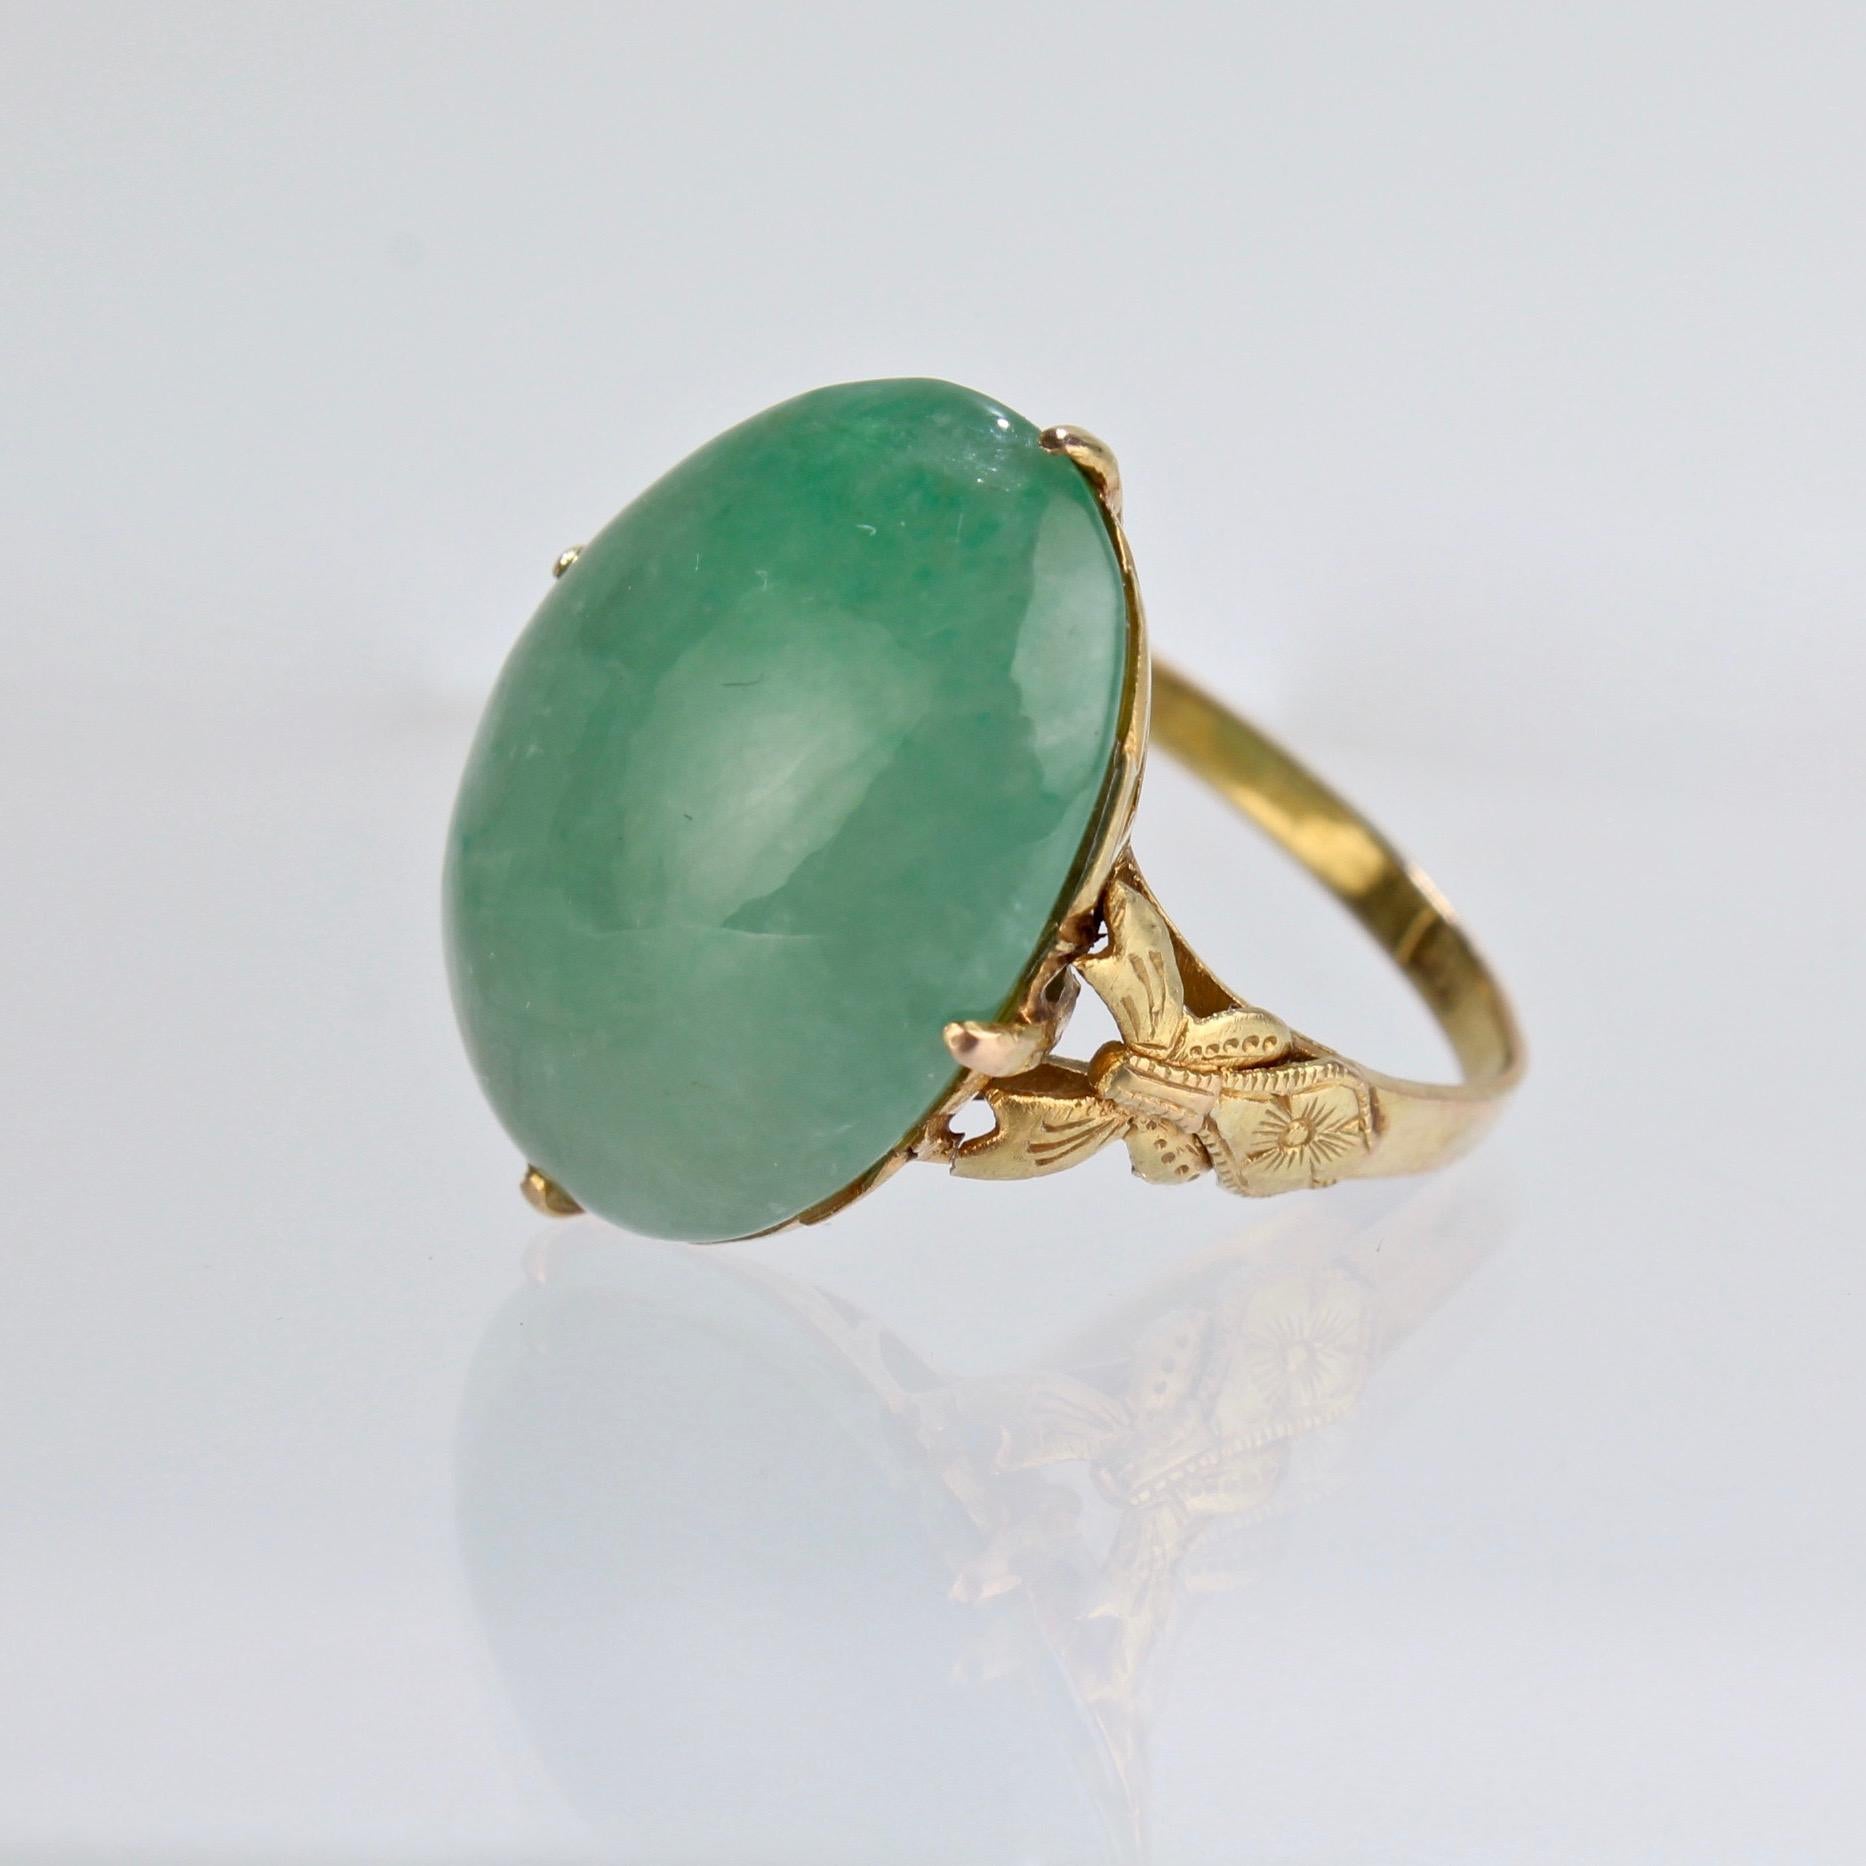 A fine estate 14k gold and jade ring.

Dating to the 1970s, the jadeite cabochon is prong set in a textured 14k gold setting. The The shoulders have a finely-worked butterfly and flower design and the basket setting has openwork to allow light to